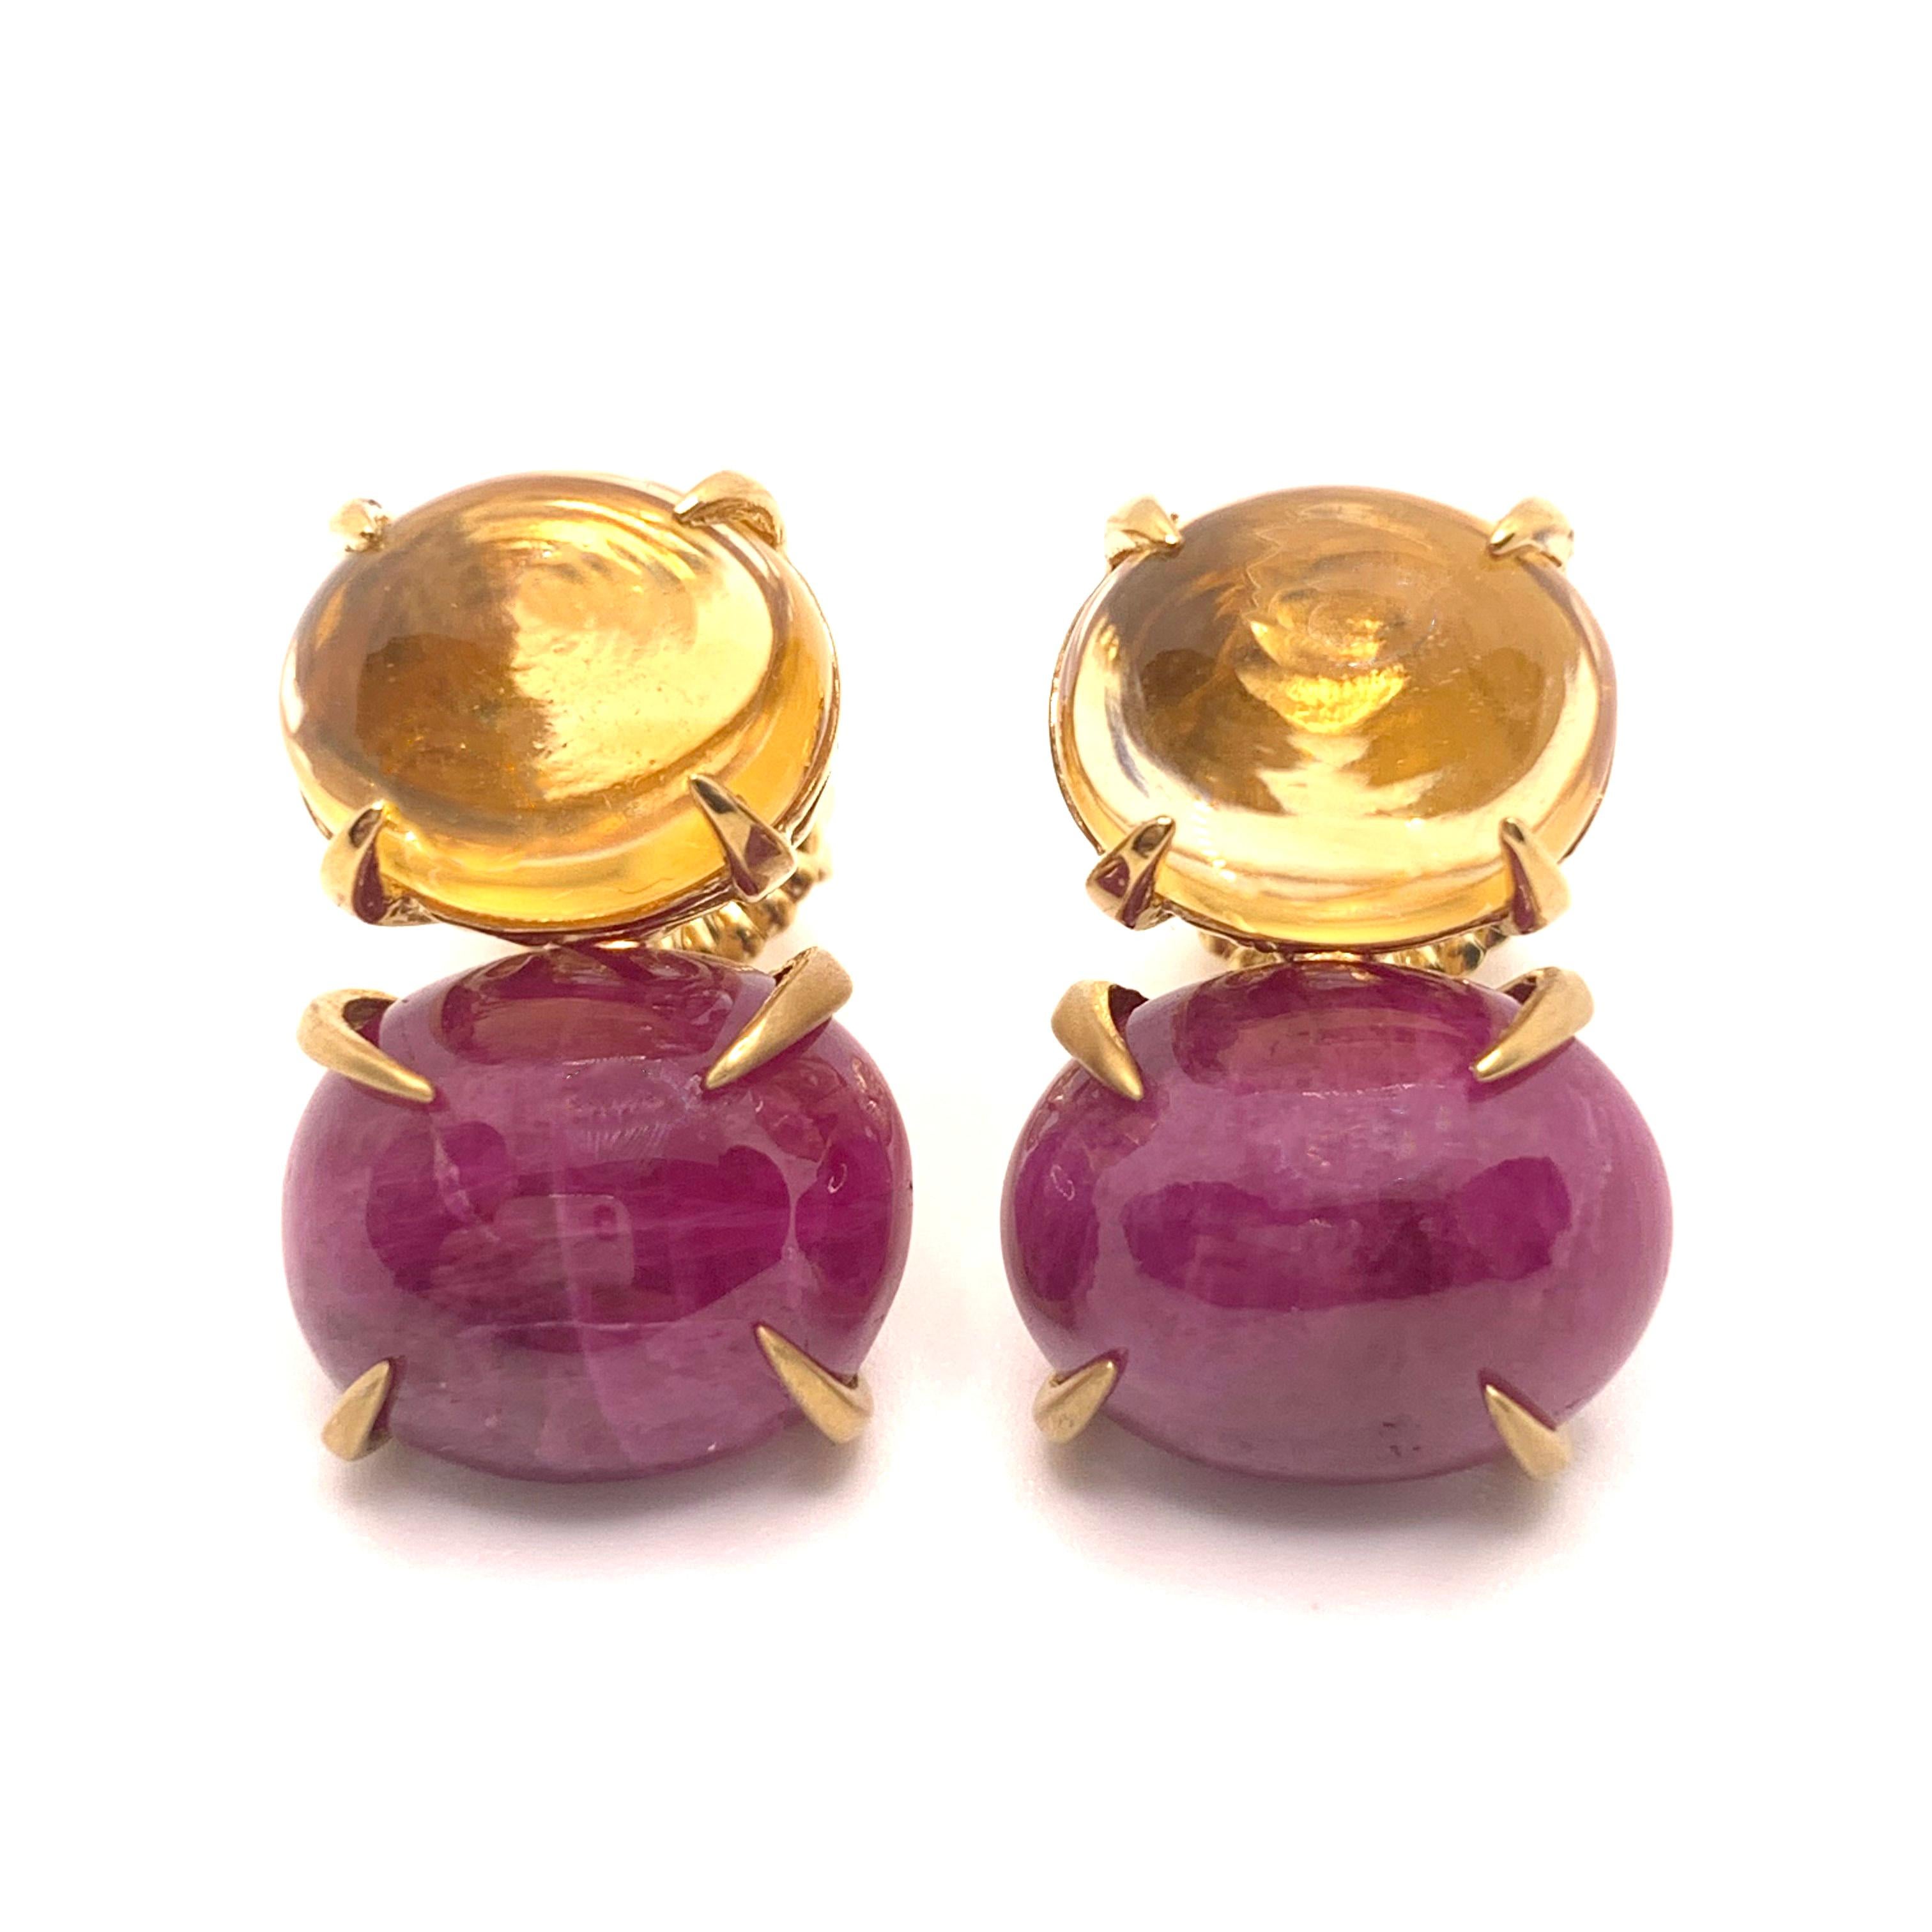 Stunning Bijoux Num Double Oval Cabochon-cut Citrine and Ruby Vermeil Earrings. 

The earrings feature a pair of beautiful oval cabochon-cut Brazilian citrine (very clear) and a pair of oval cabochon-cut African ruby, handset in 18k gold vermeil